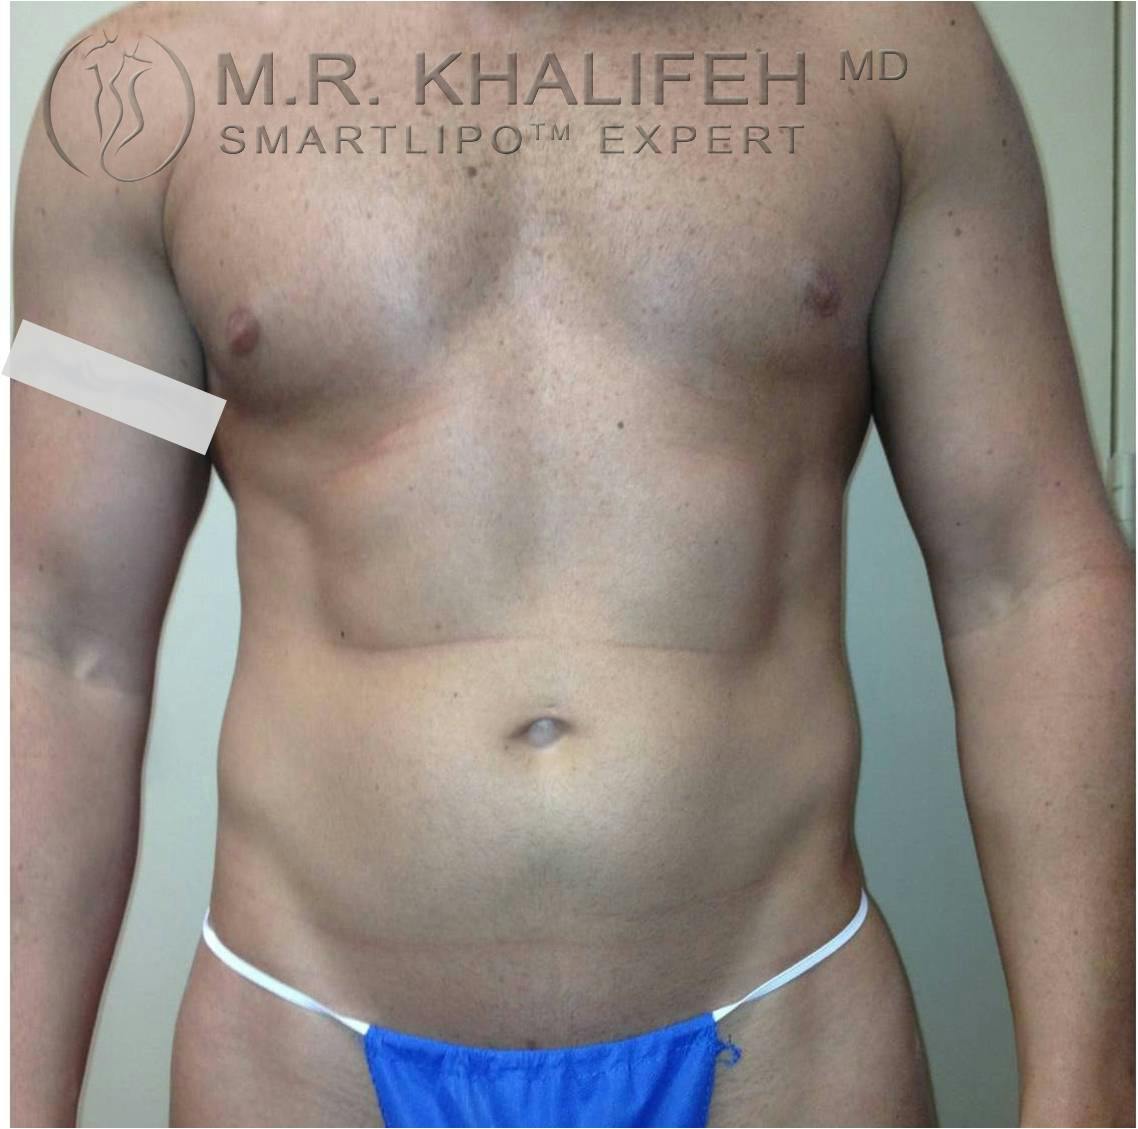 Abdominal Liposuction Gallery - Patient 3718044 - Image 1